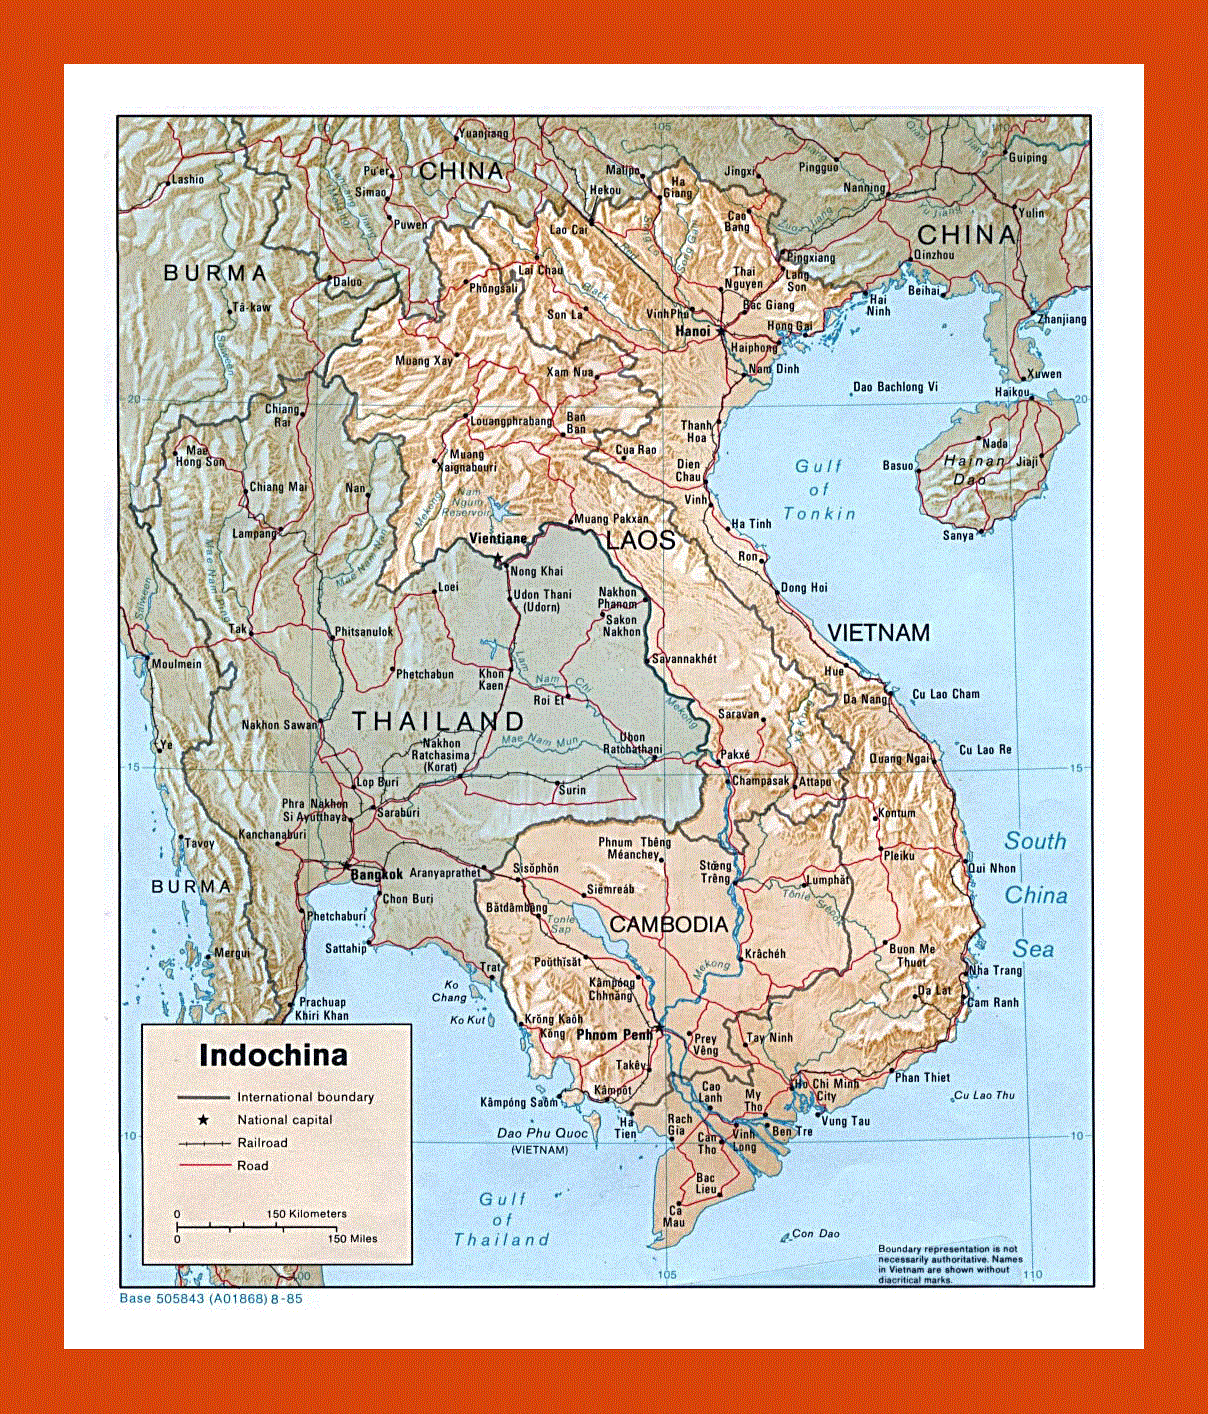 Political map of Indochina - 1985